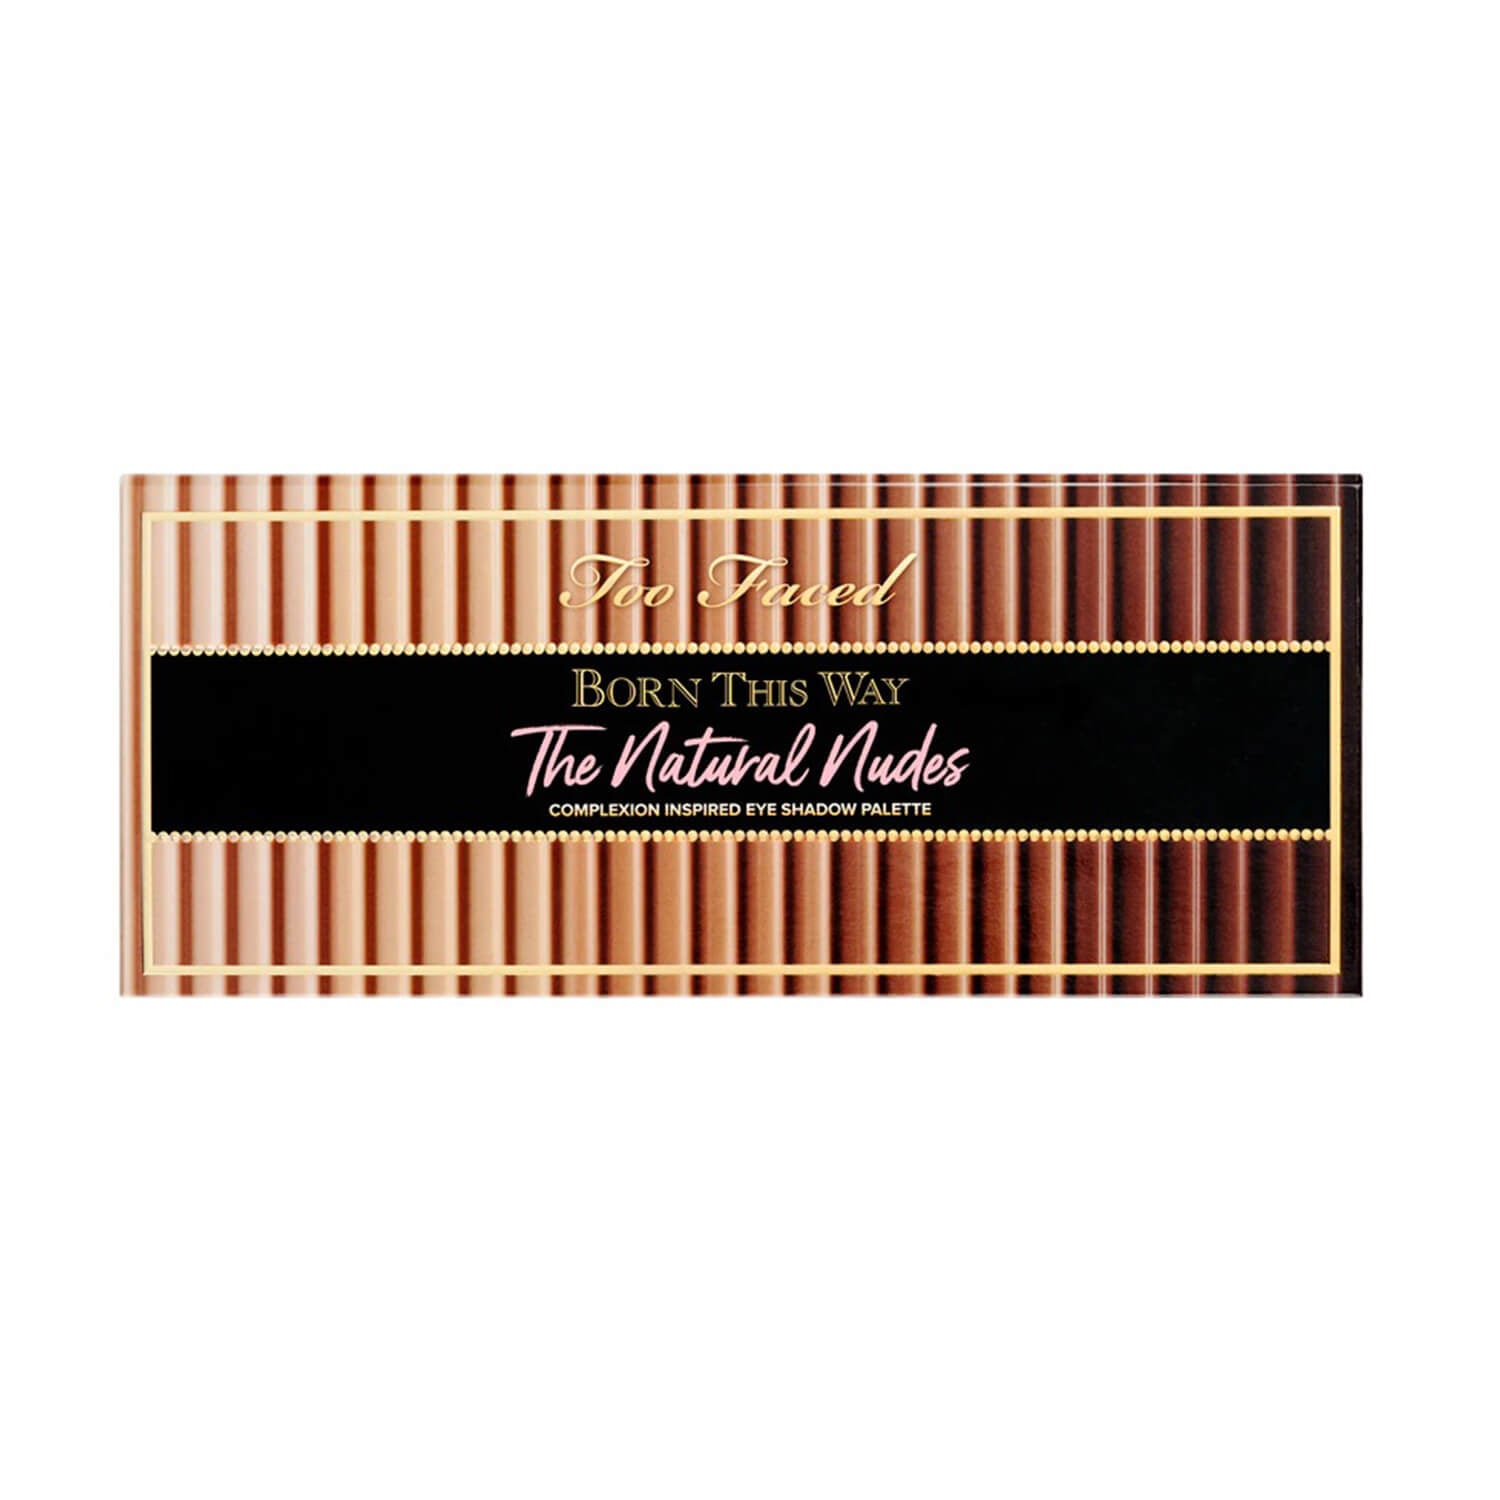 Too Faced born this way natural nudes eyeshadow palette. cash on delivery in karachi lahore islamabad pakistan